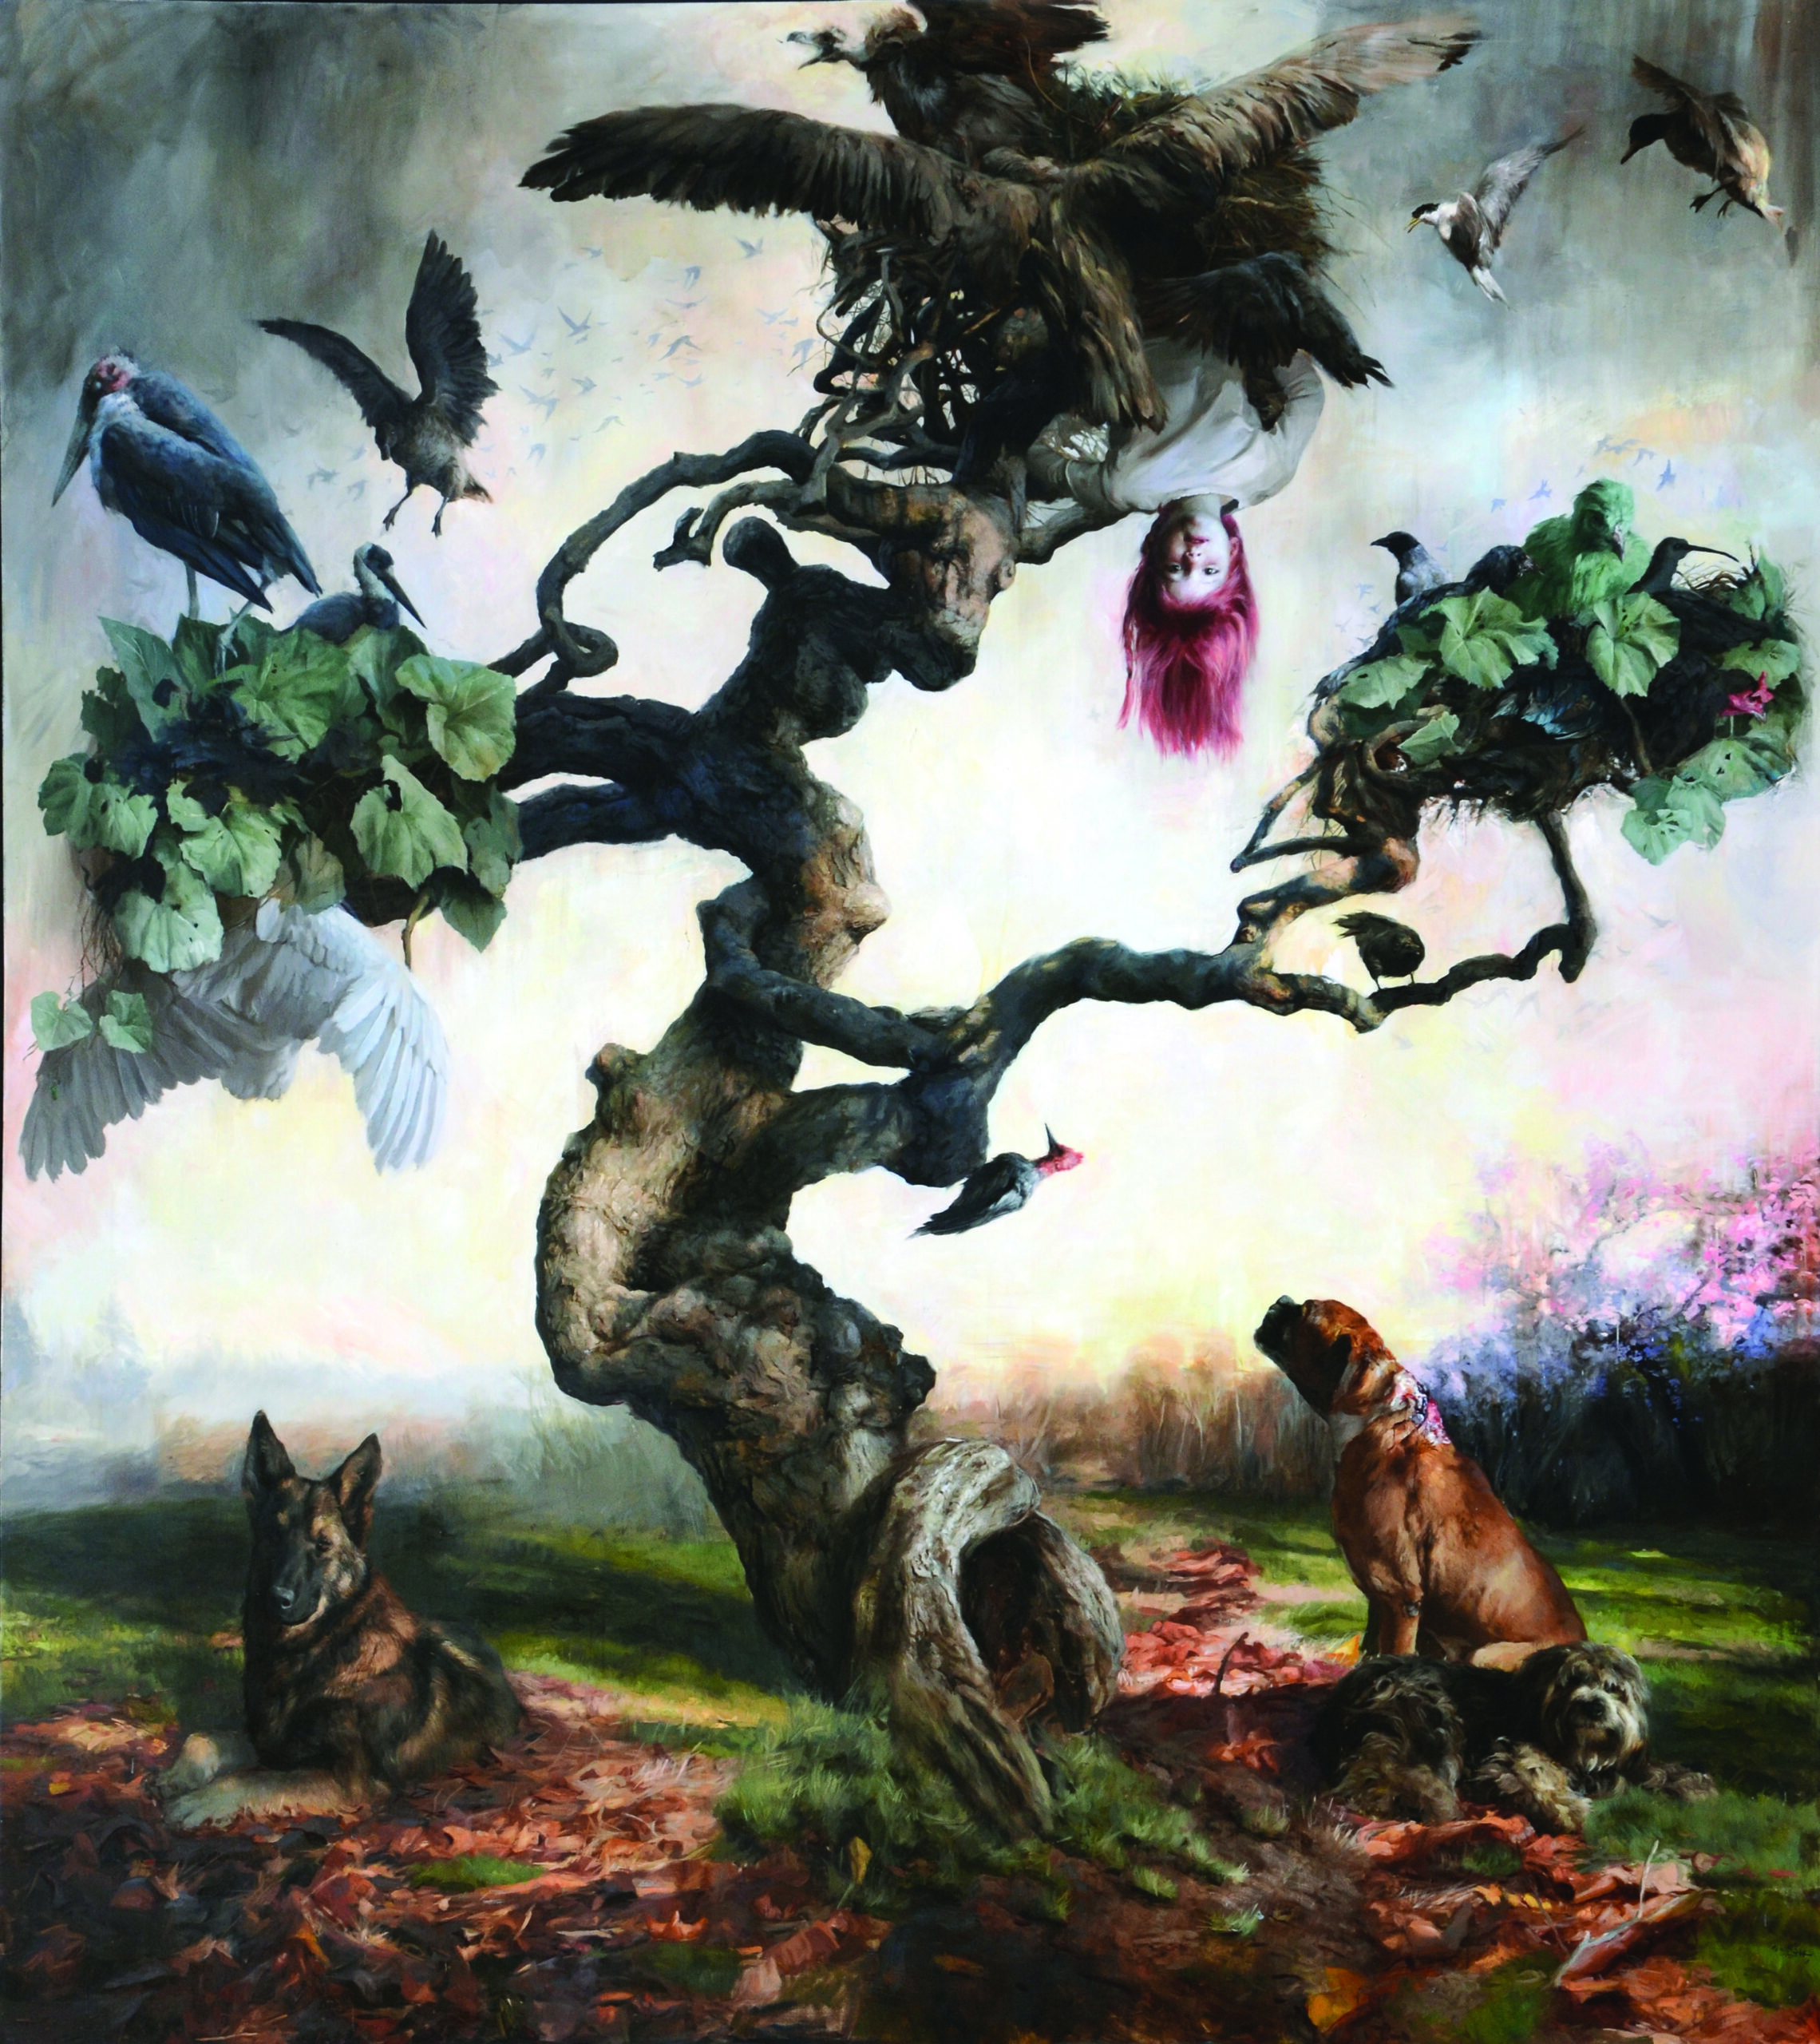 Narrative painting - Guillermo Lorca, "Eternal Life," 2013, oil on canvas, 114 1/4 x 102 1/4 in., Fine Arts Museum of Chile, Santiago